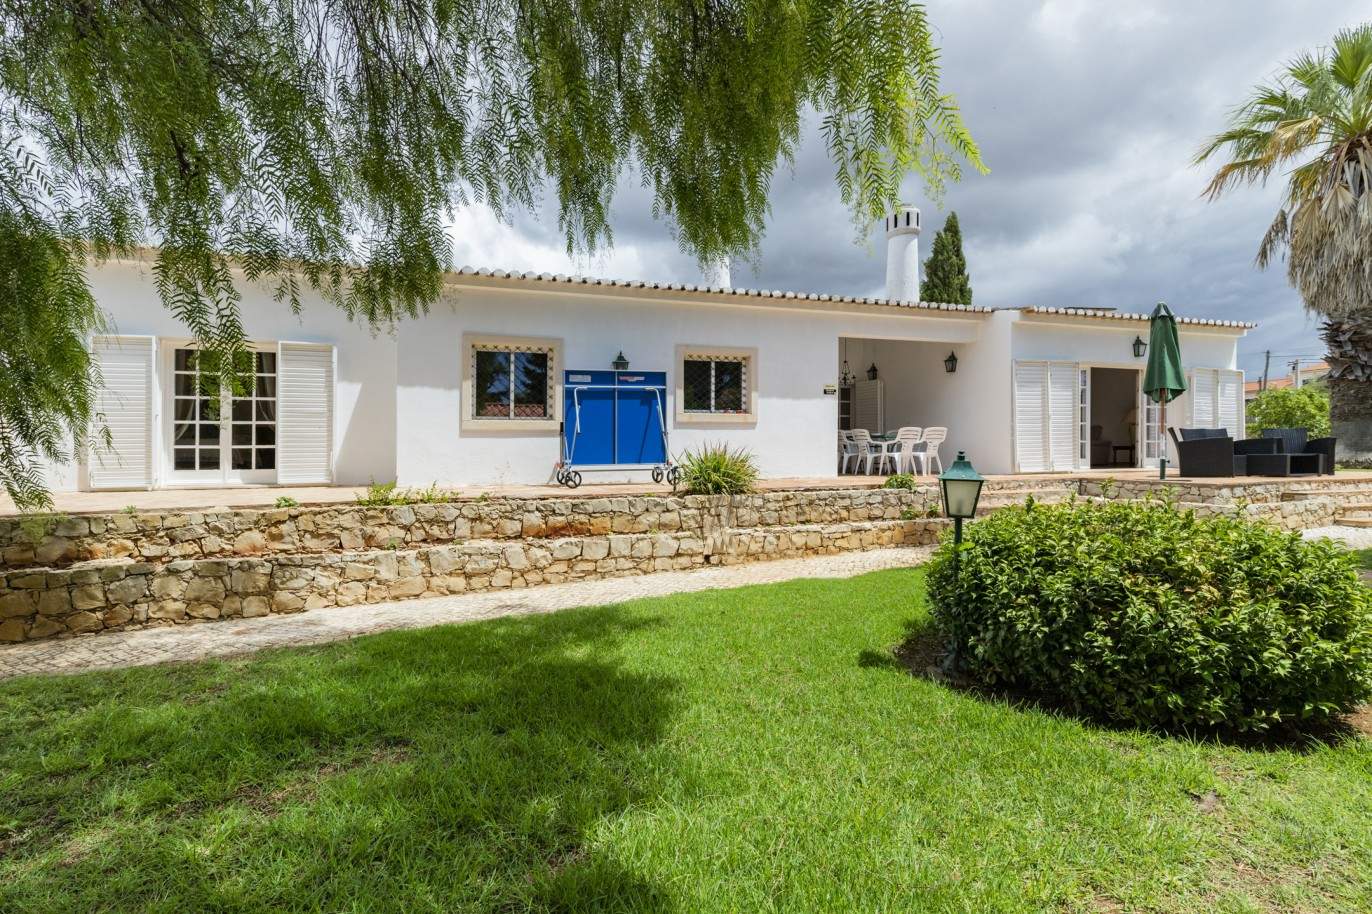 Rustic 5 bedrooms villa with pool and orchard, for sale in Pêra, Algarve_201829